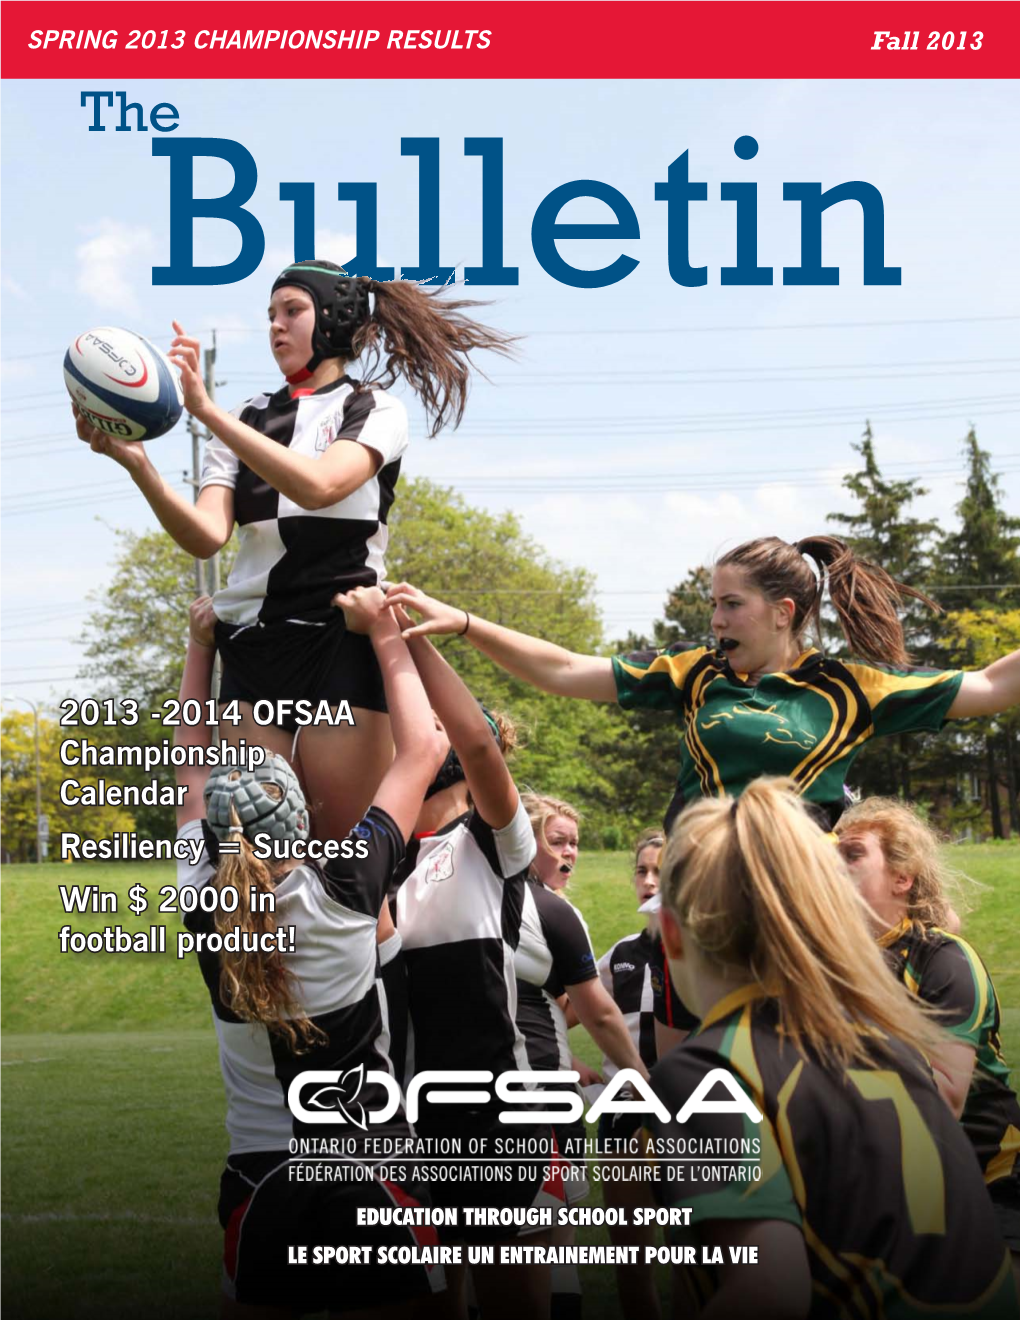 2013 -2014 OFSAA Championship Calendar Resiliency = Success Win $ 2000 in Football Product!